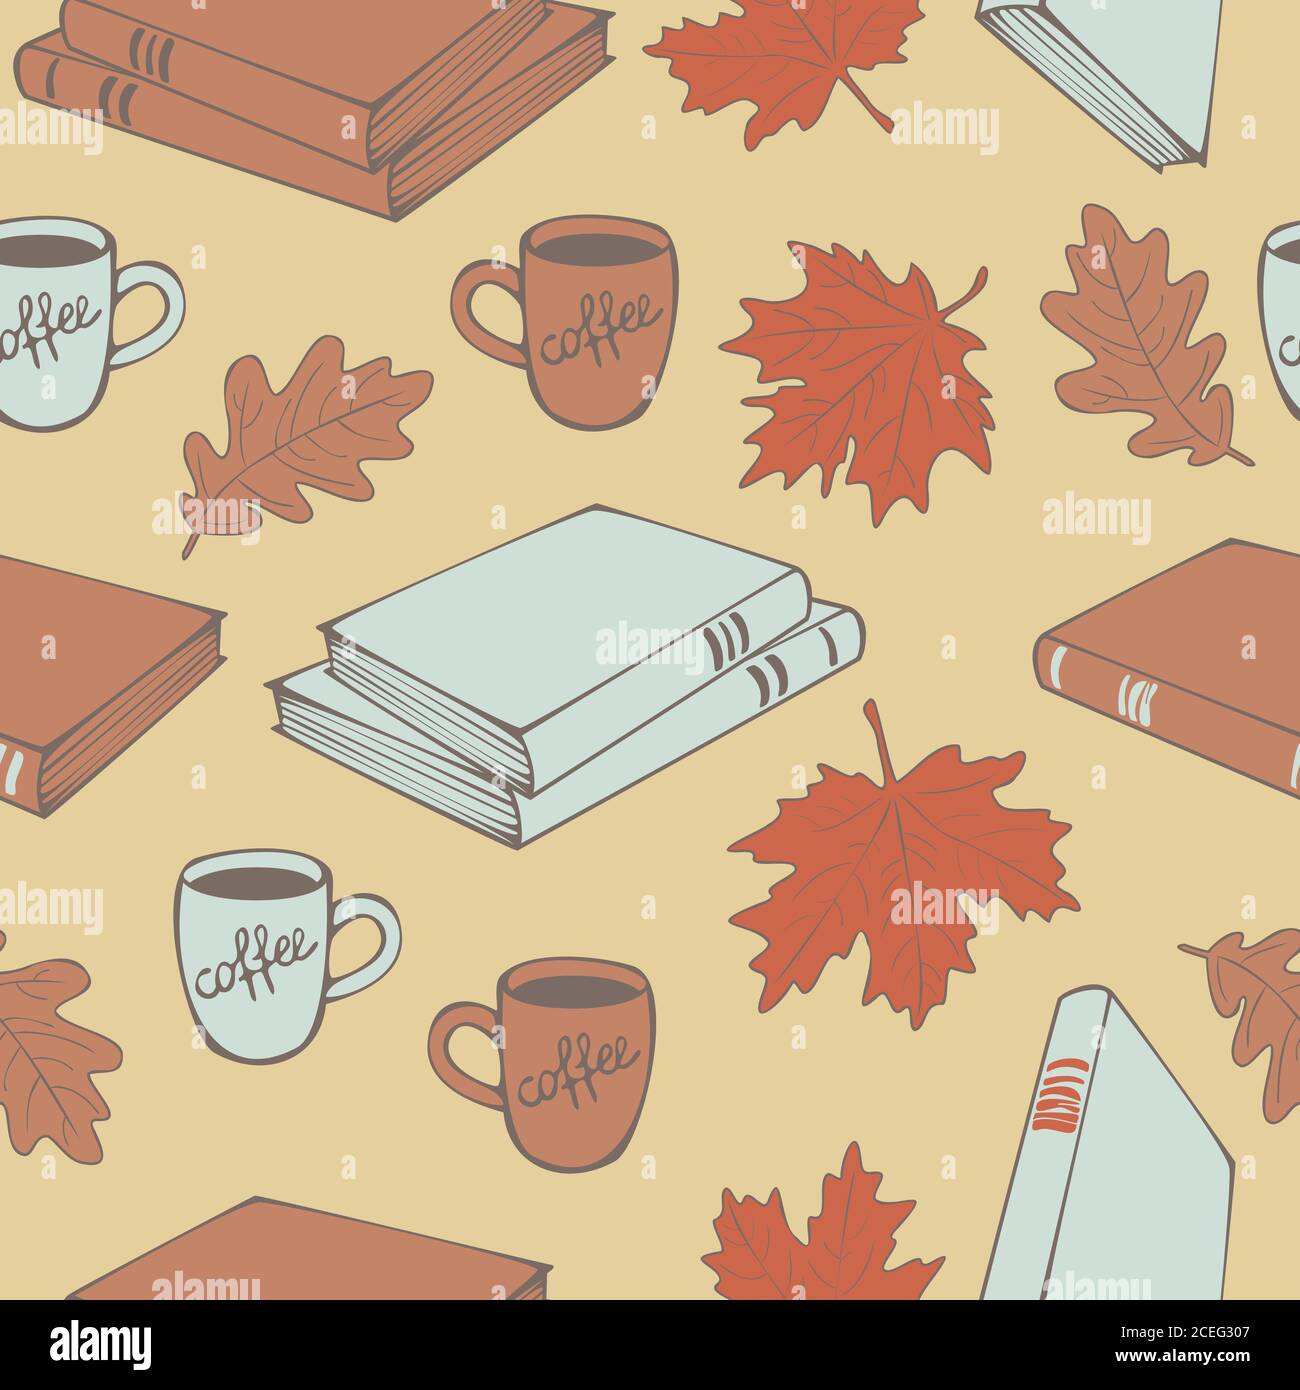 Seamless pattern of books, autumn and oak maple leaves and cups